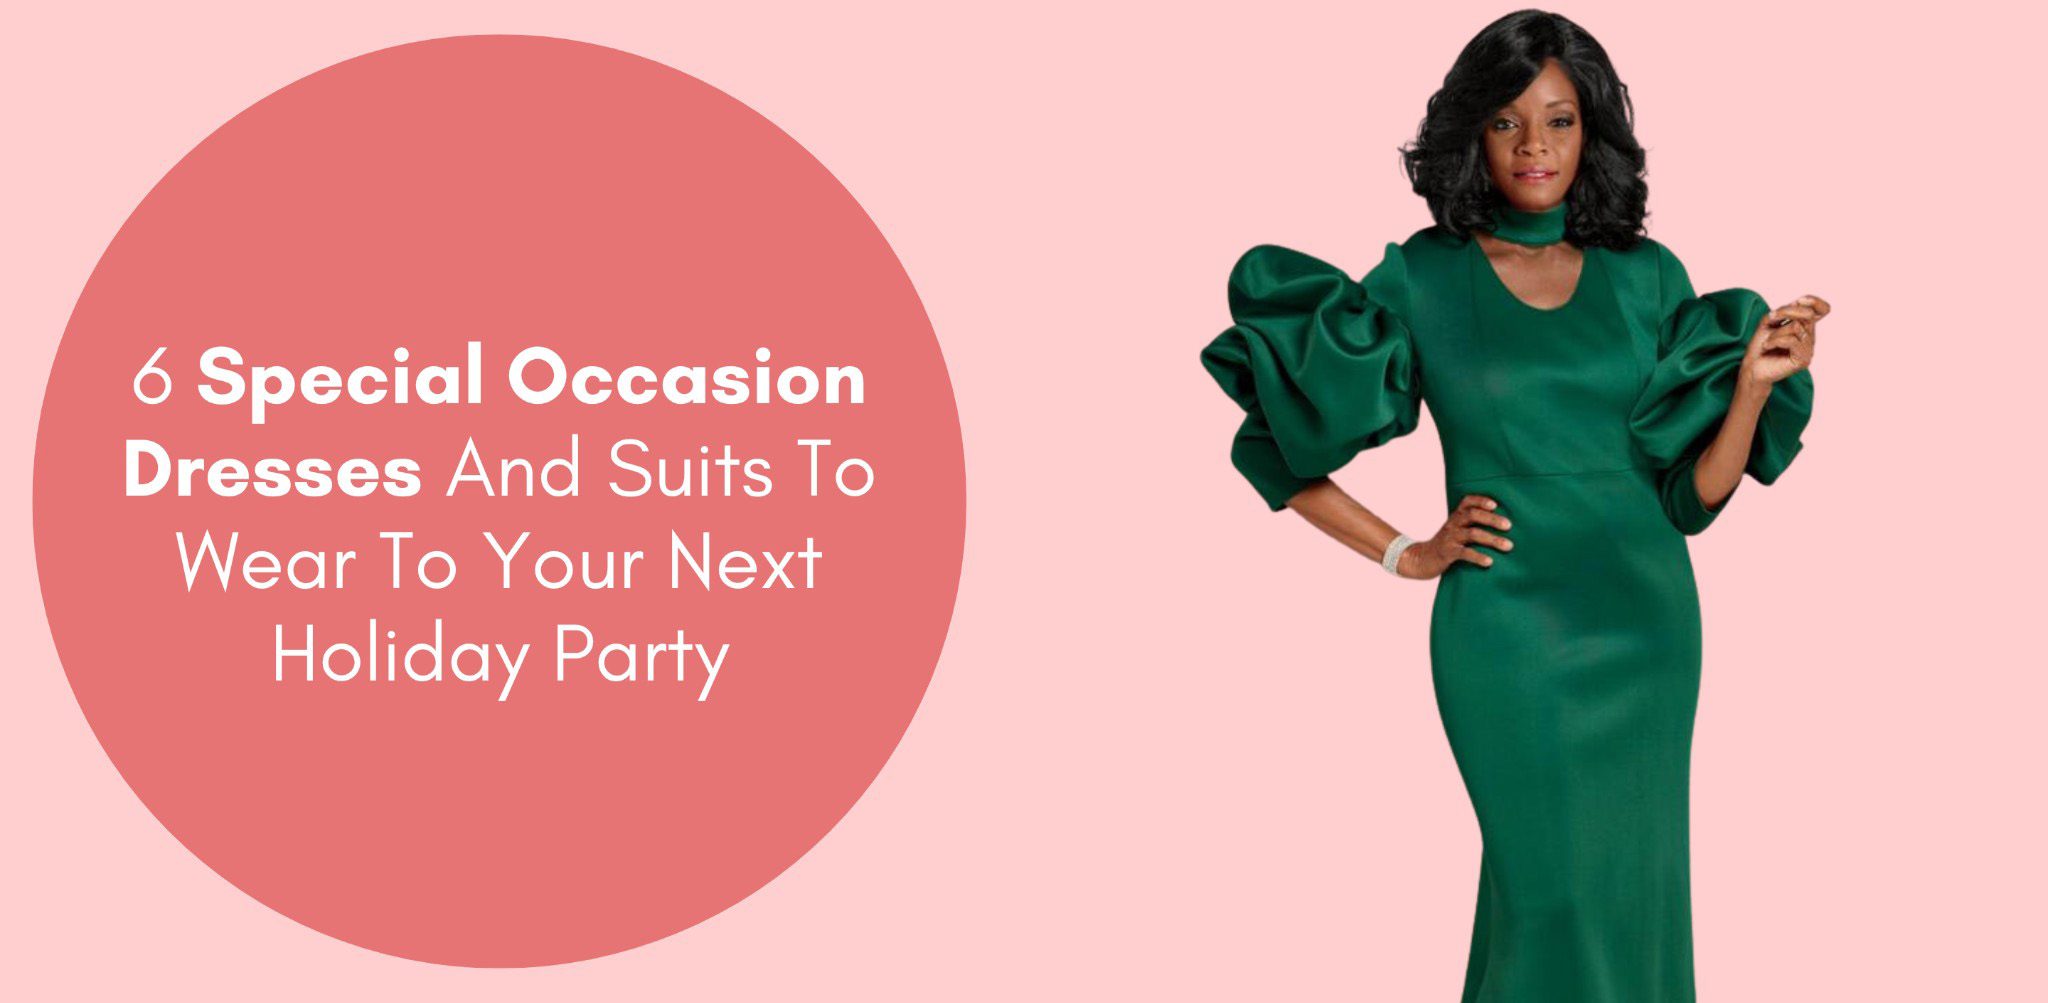 6 Special Occasion Dresses And Suits To Wear To Your Next Holiday Party